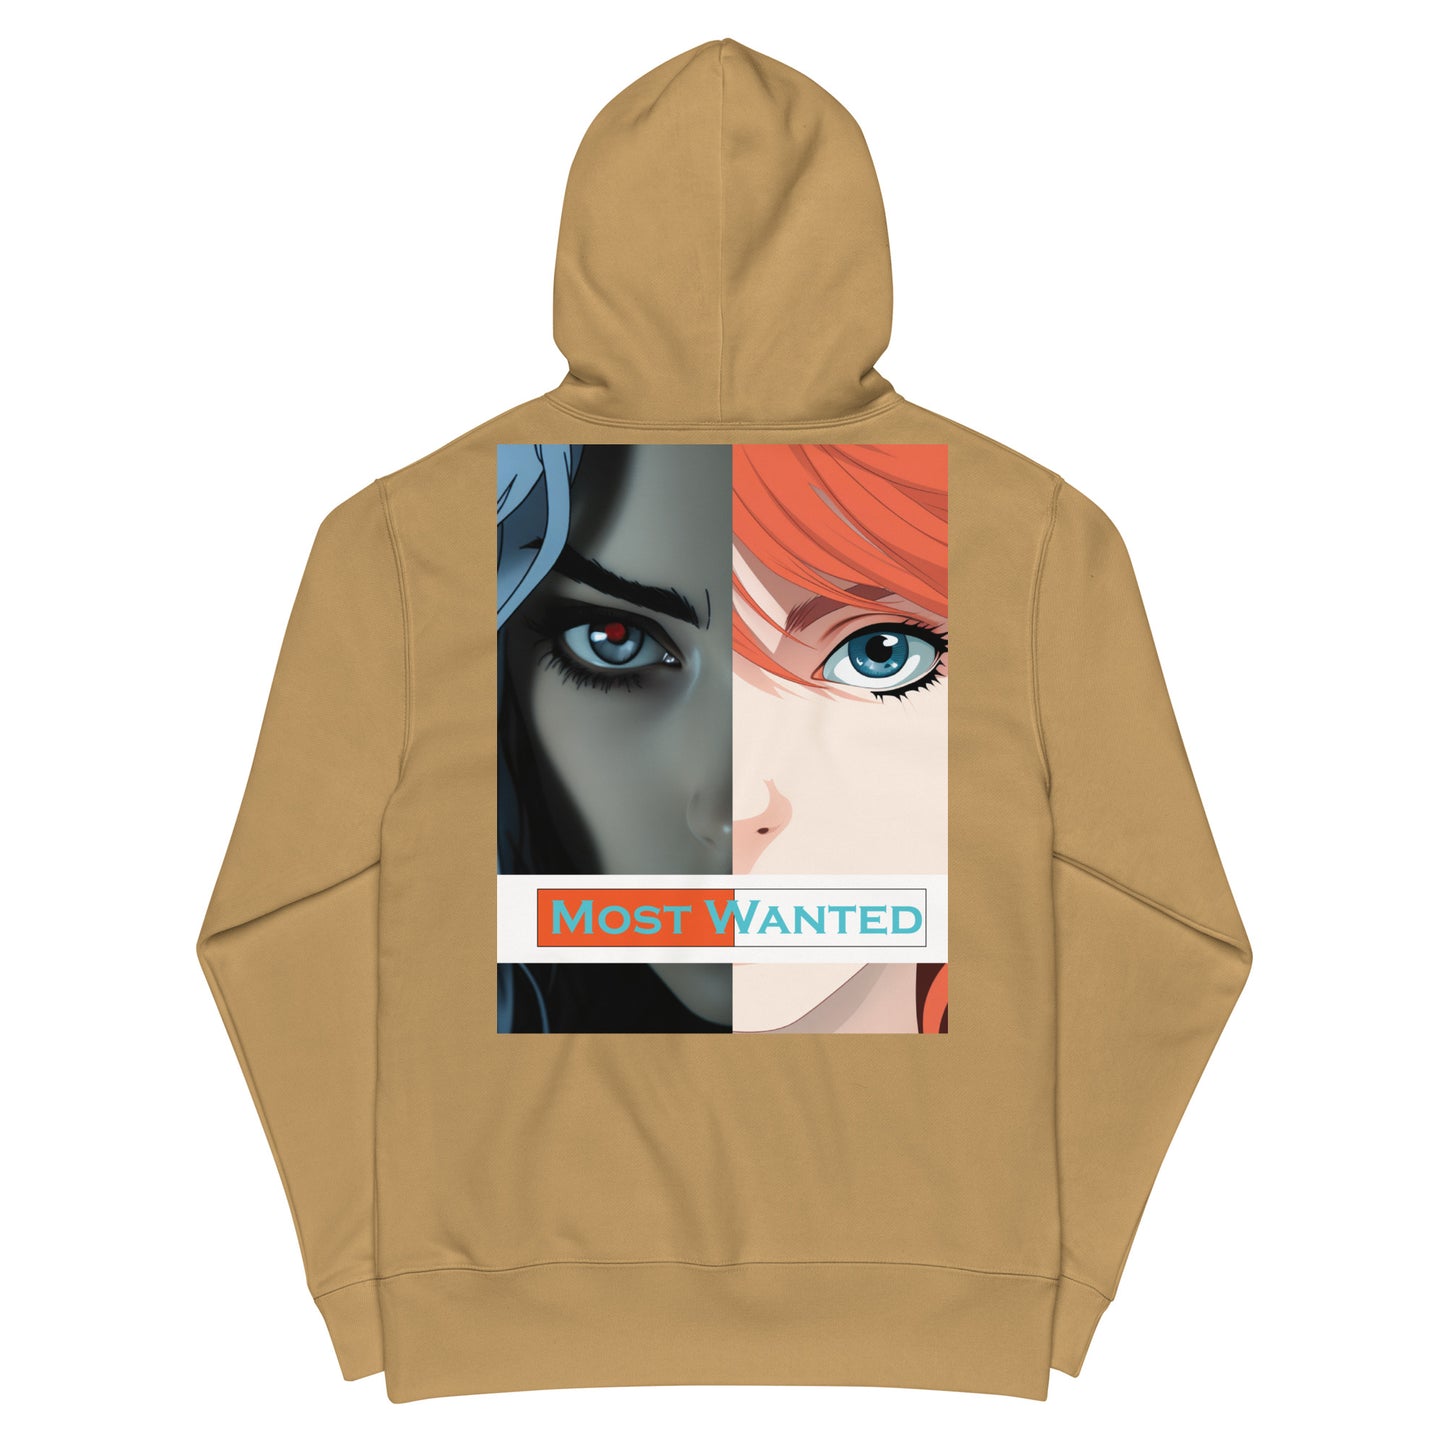 Its In the Eyes- Hoodie (Most Wanted) #1